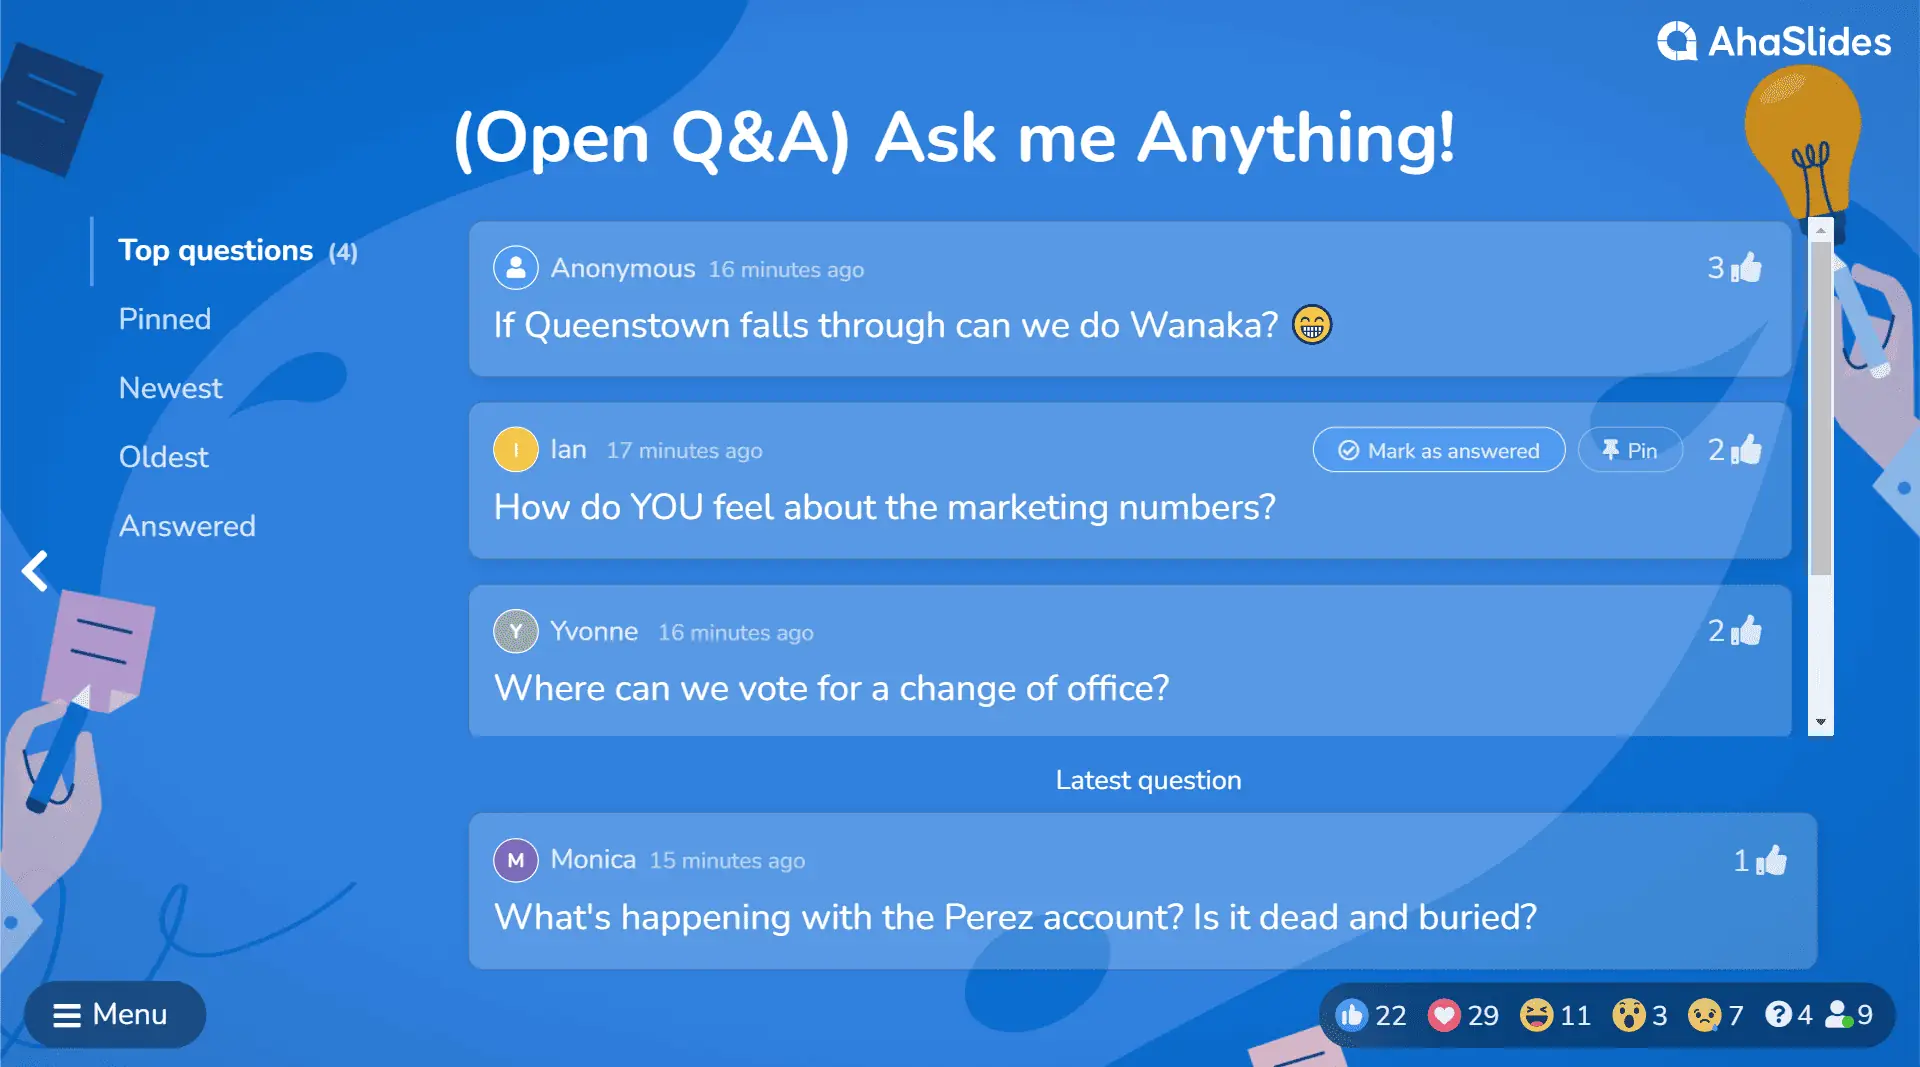 AhaSlides can be used for Q&A in a town hall meeting